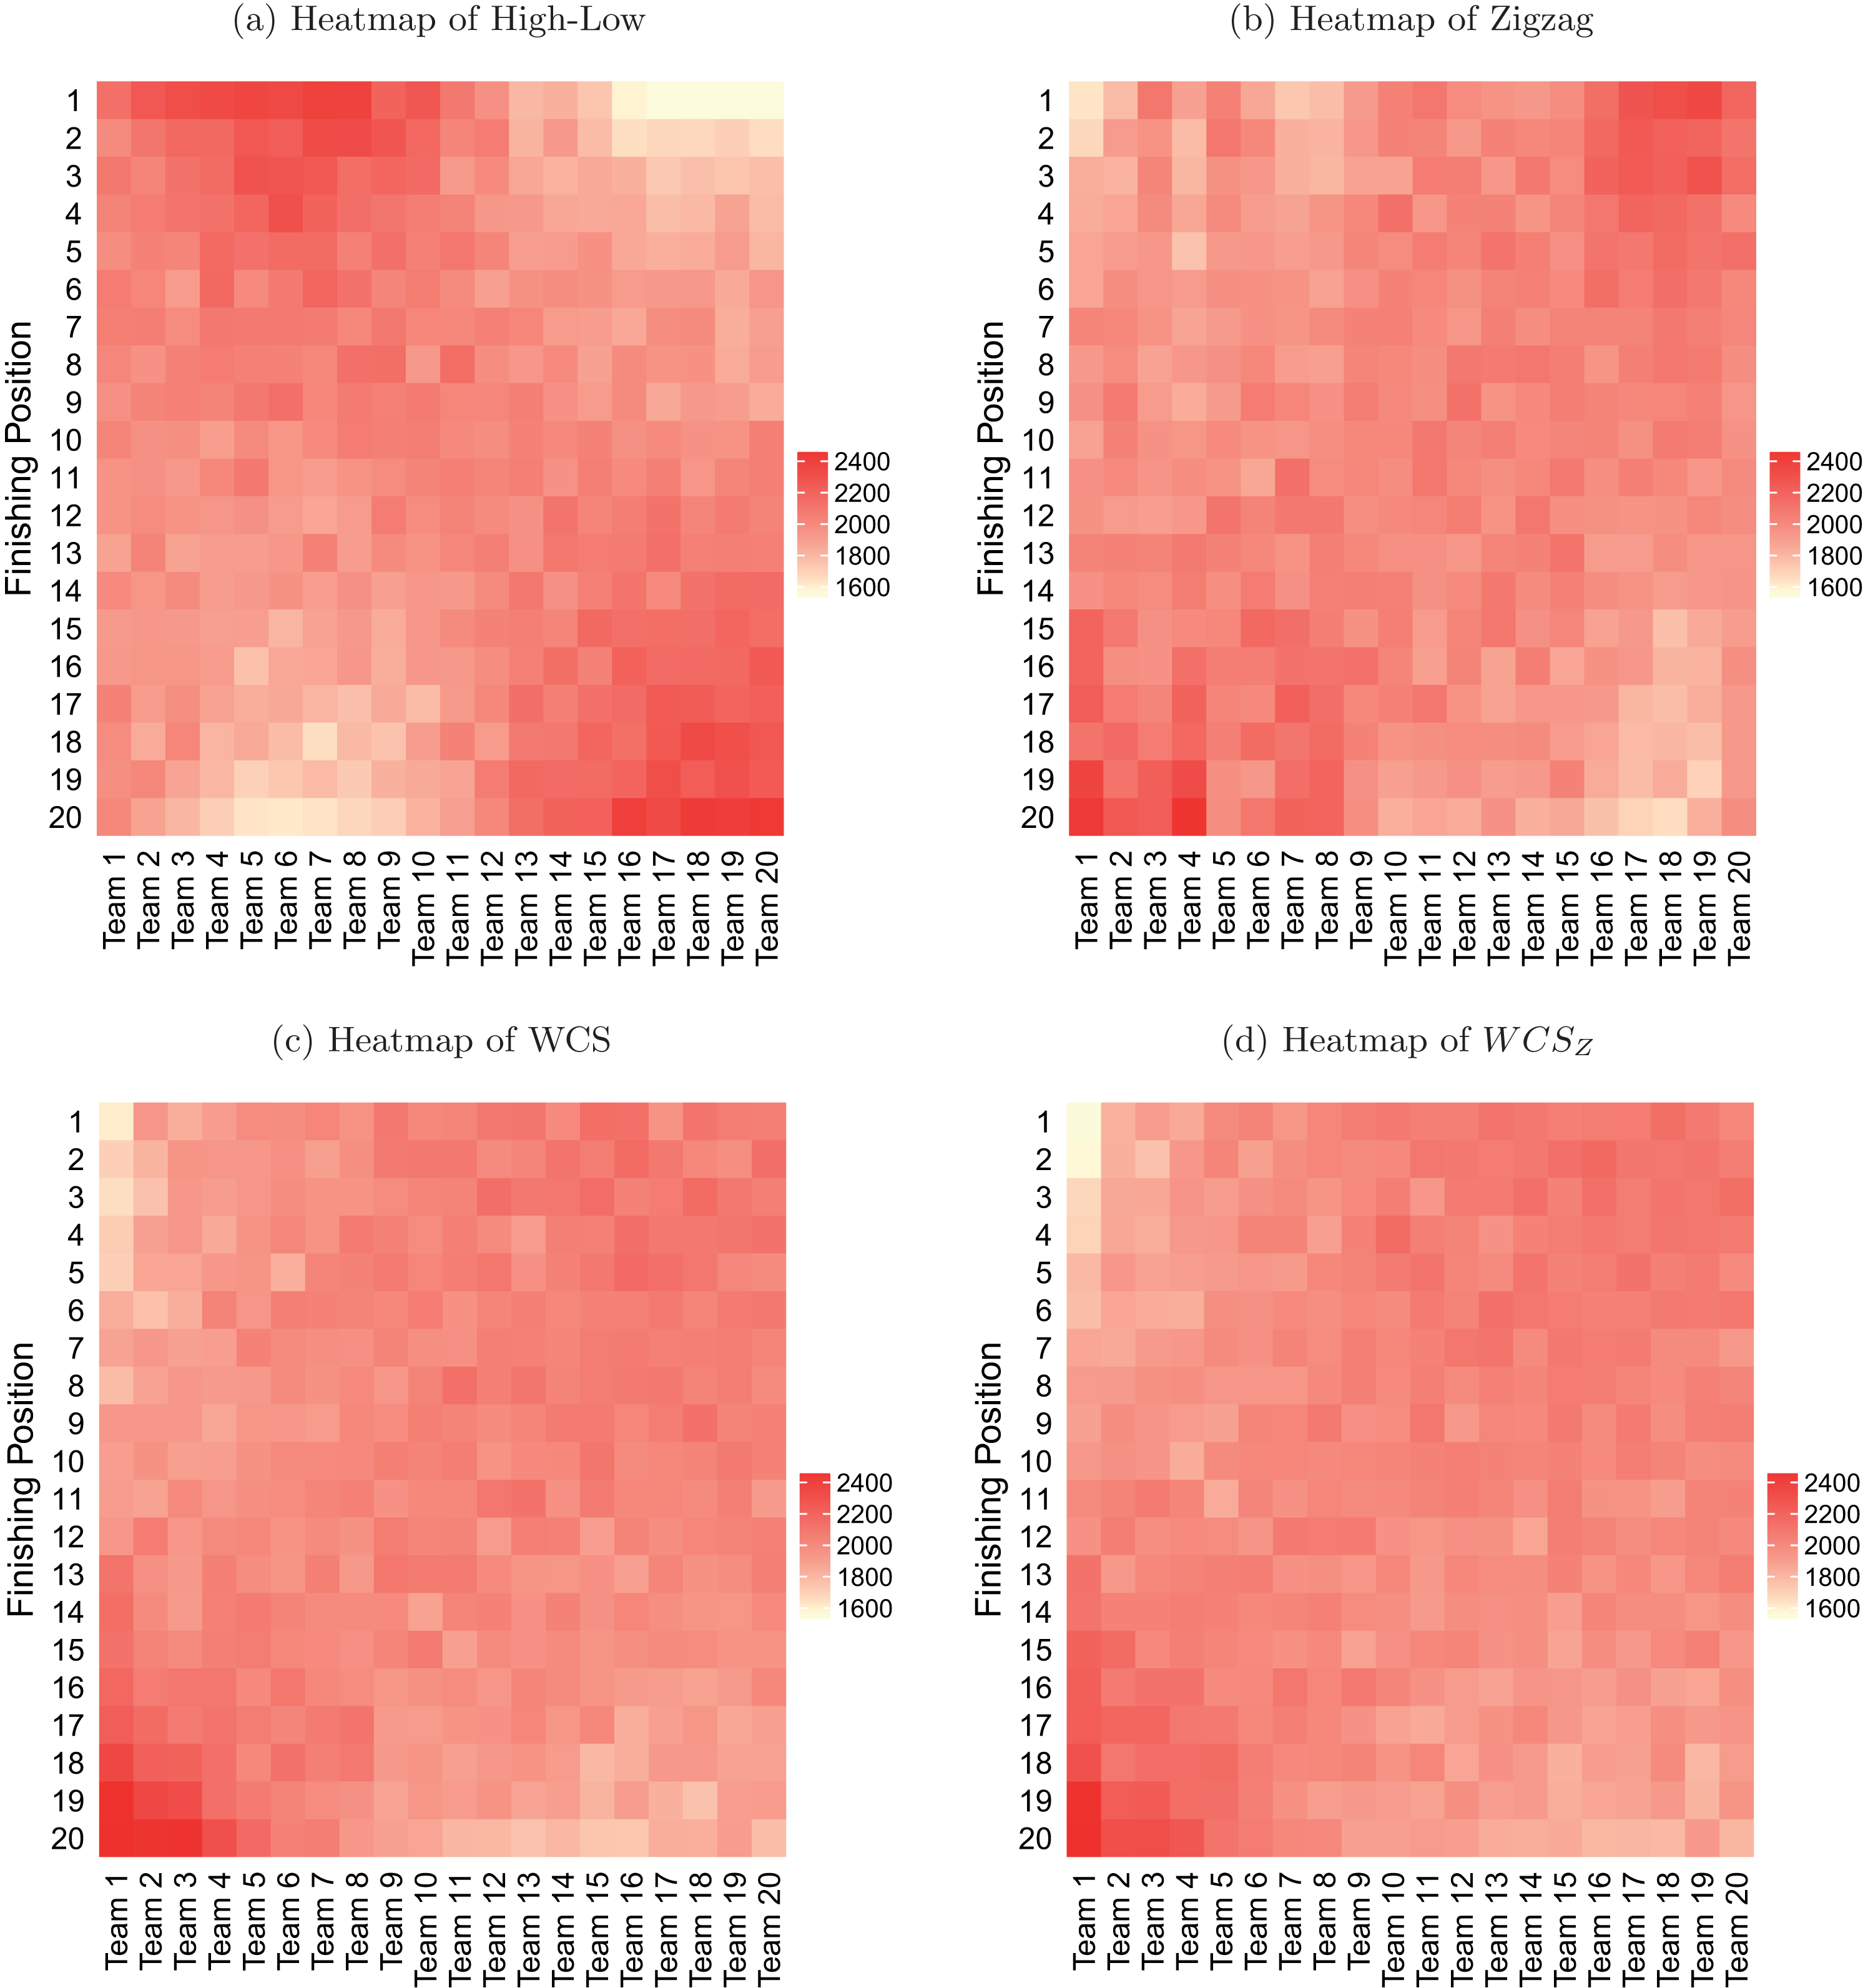 Heatmaps of the frequency tables produced by High-Low, Zigzag, WCS and WCSZ.